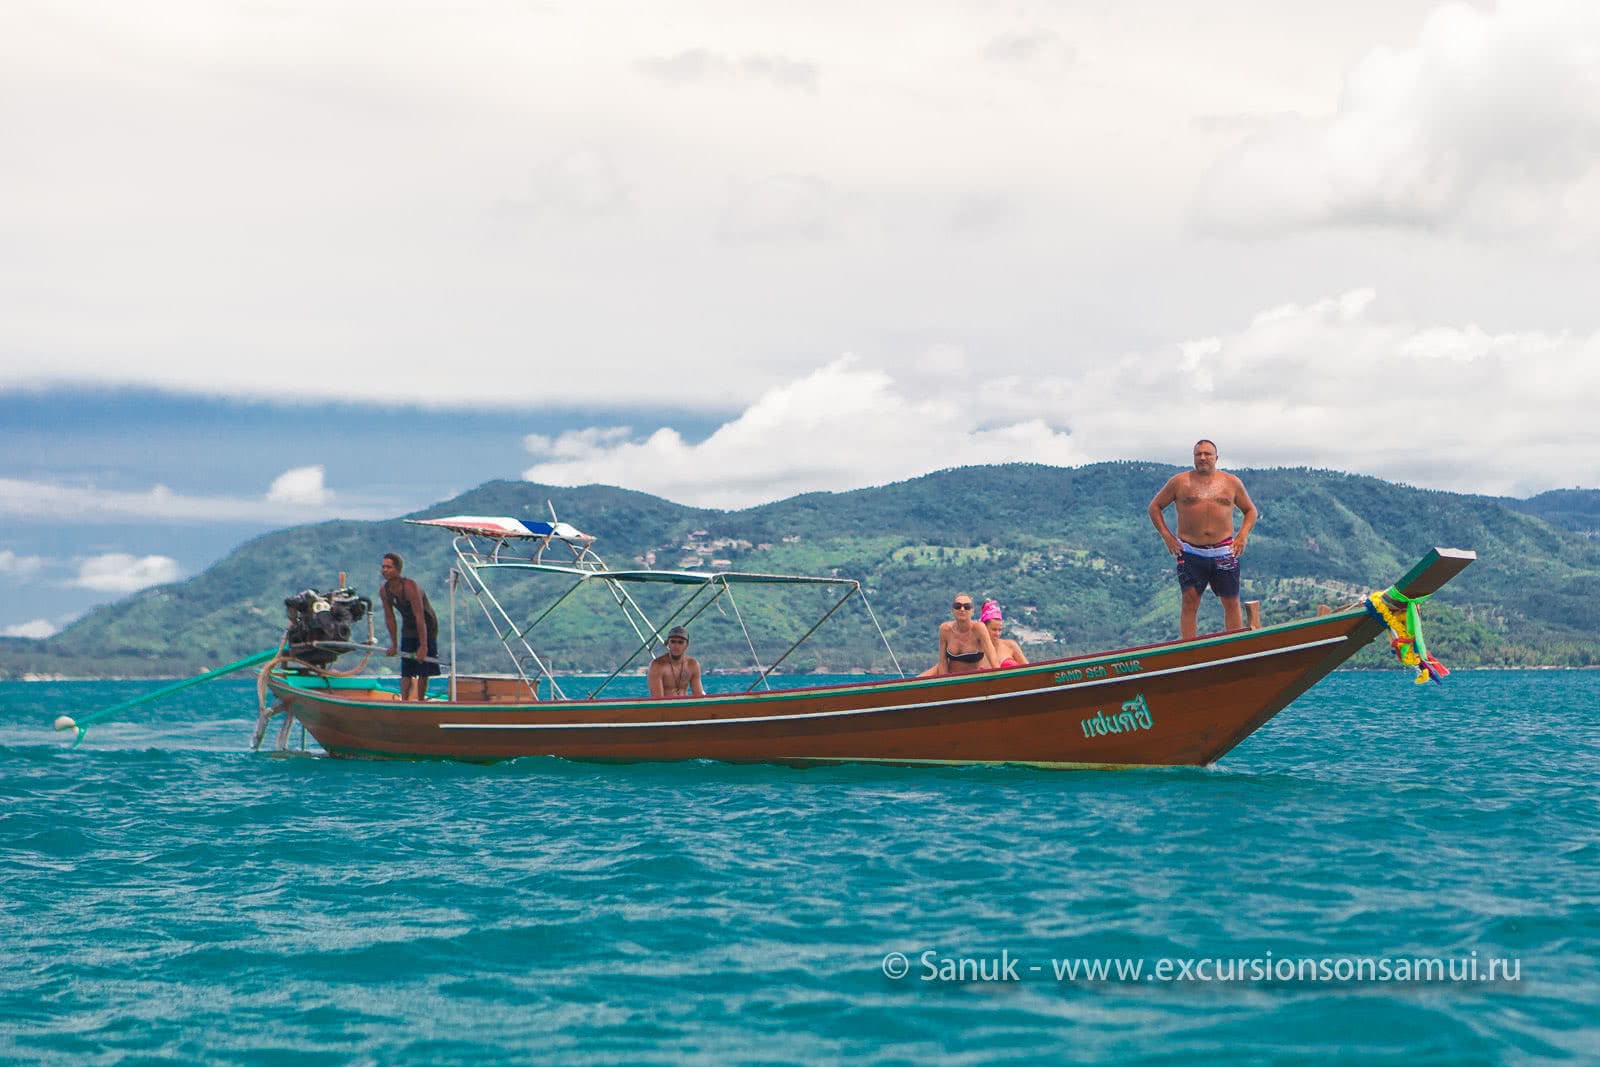 Sunset tour to Koh Tan by longtail boat, Koh Samui, Thailand